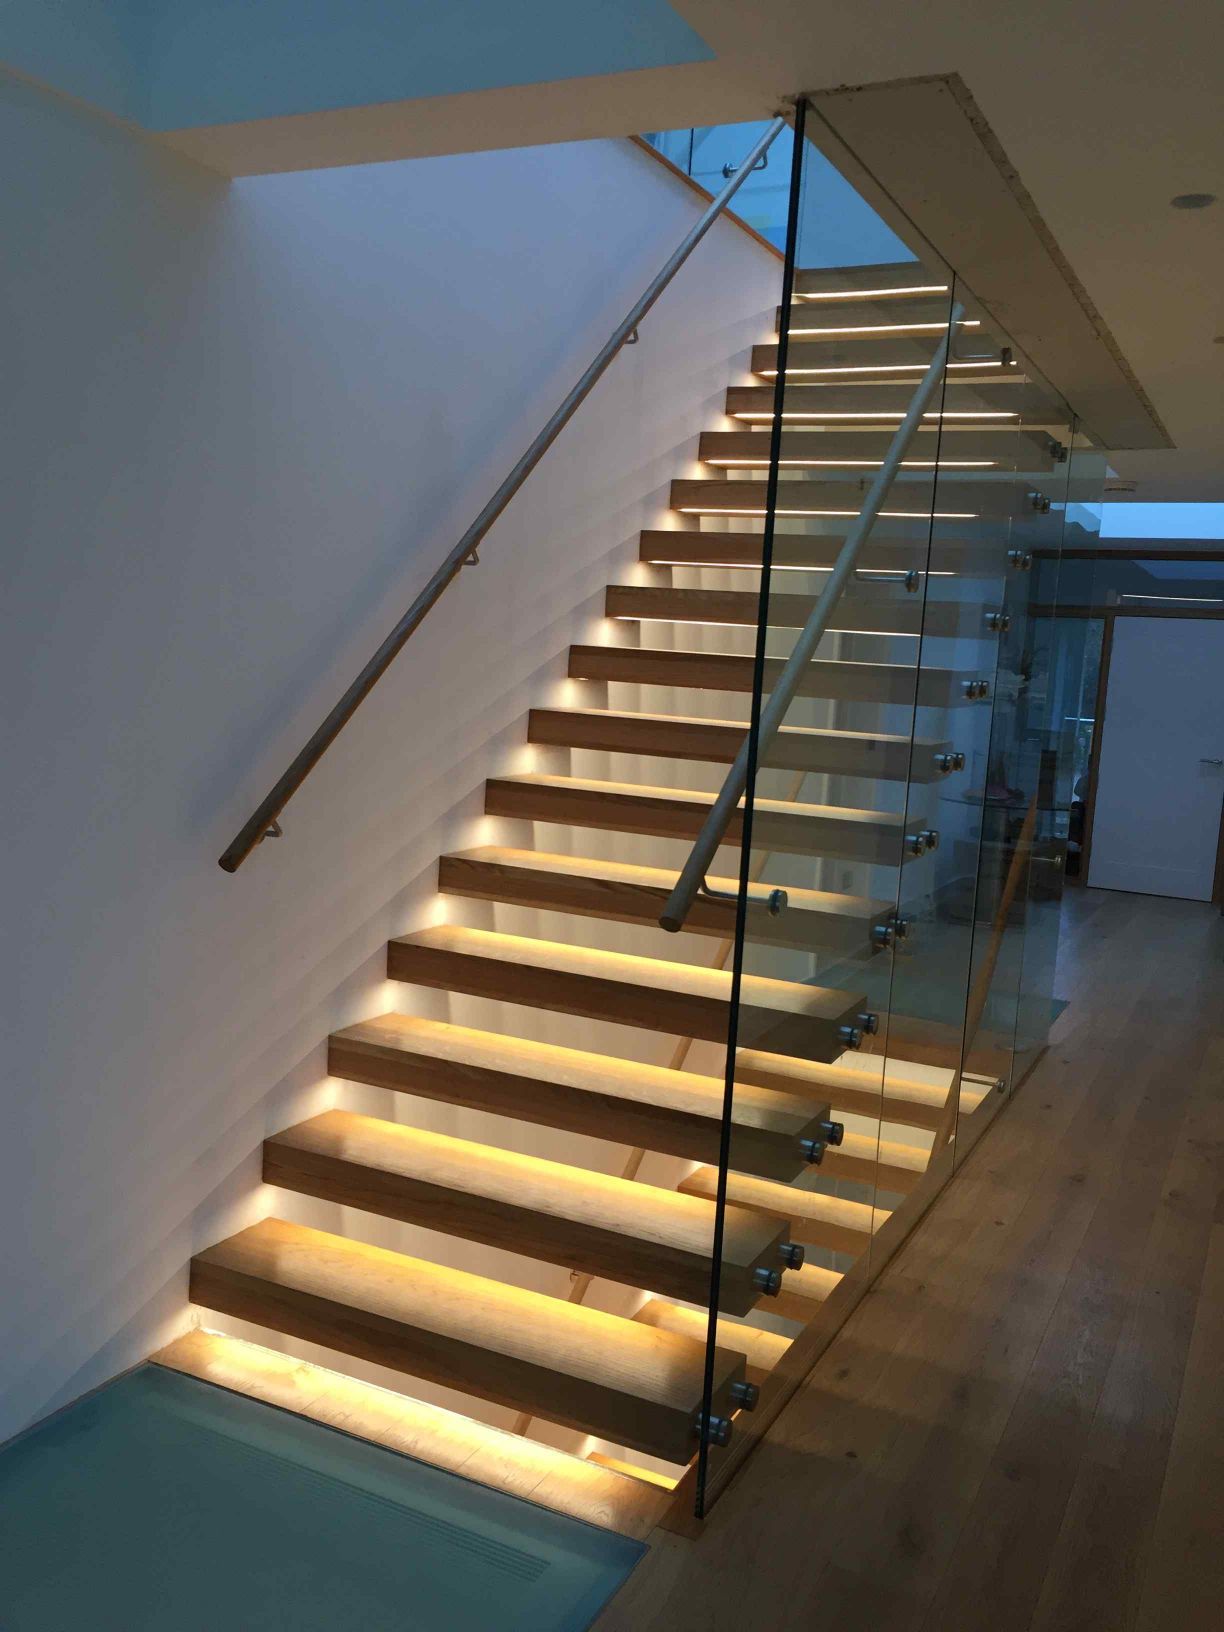 Modern floating staircase